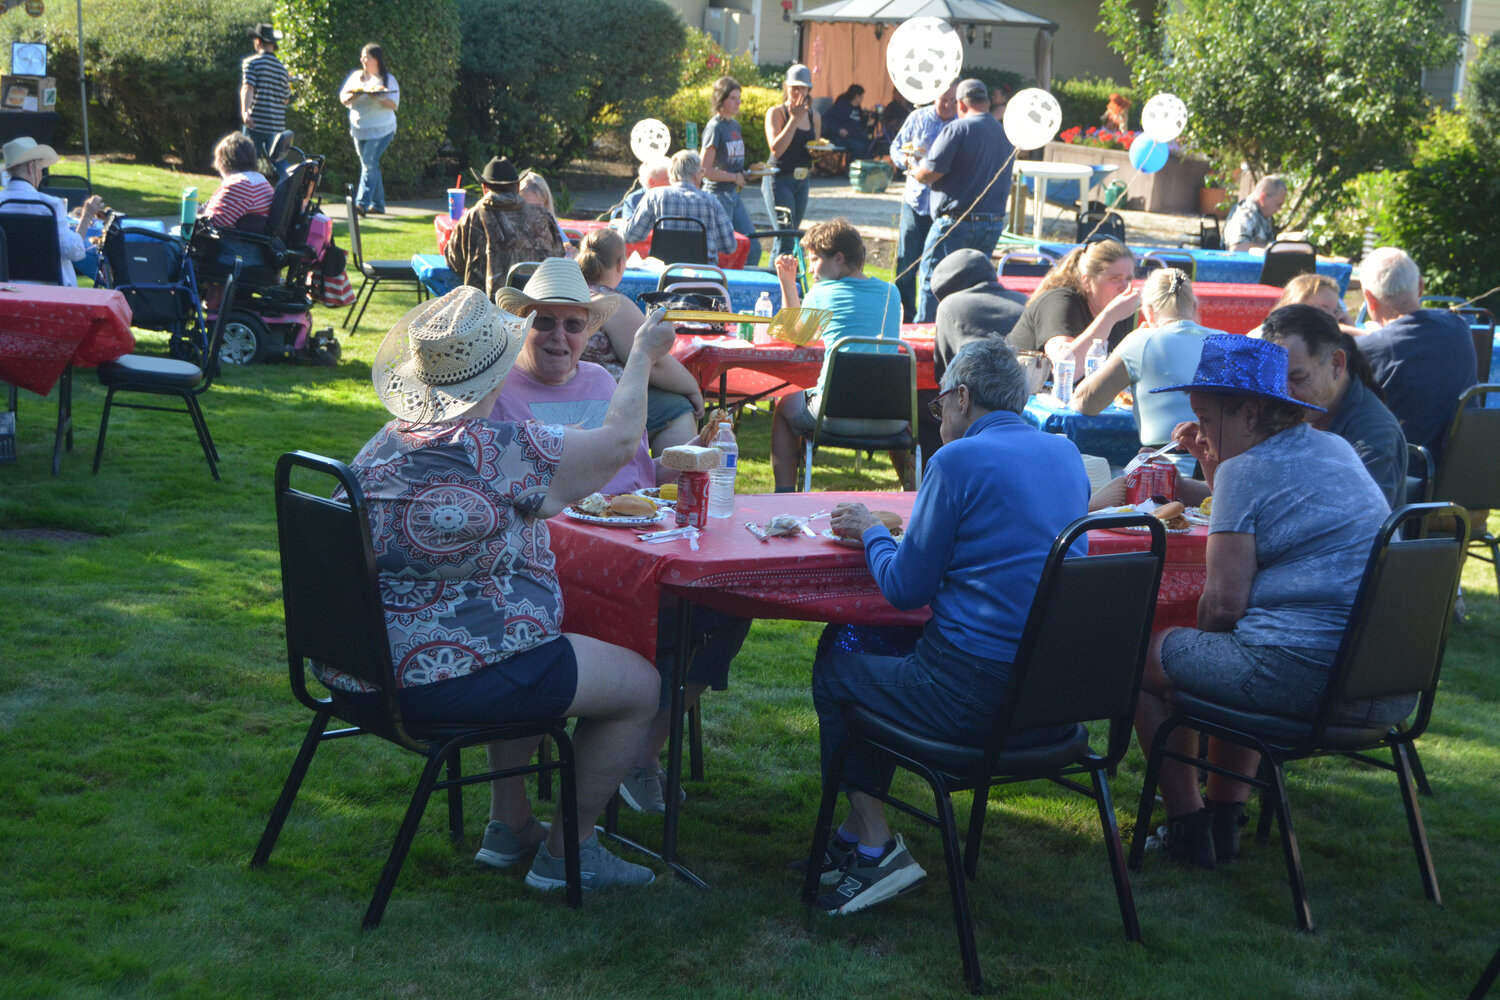 Residents dine on pulled pork sandwiches and baked beans during the Rosemont Round-Up on Sept. 8.